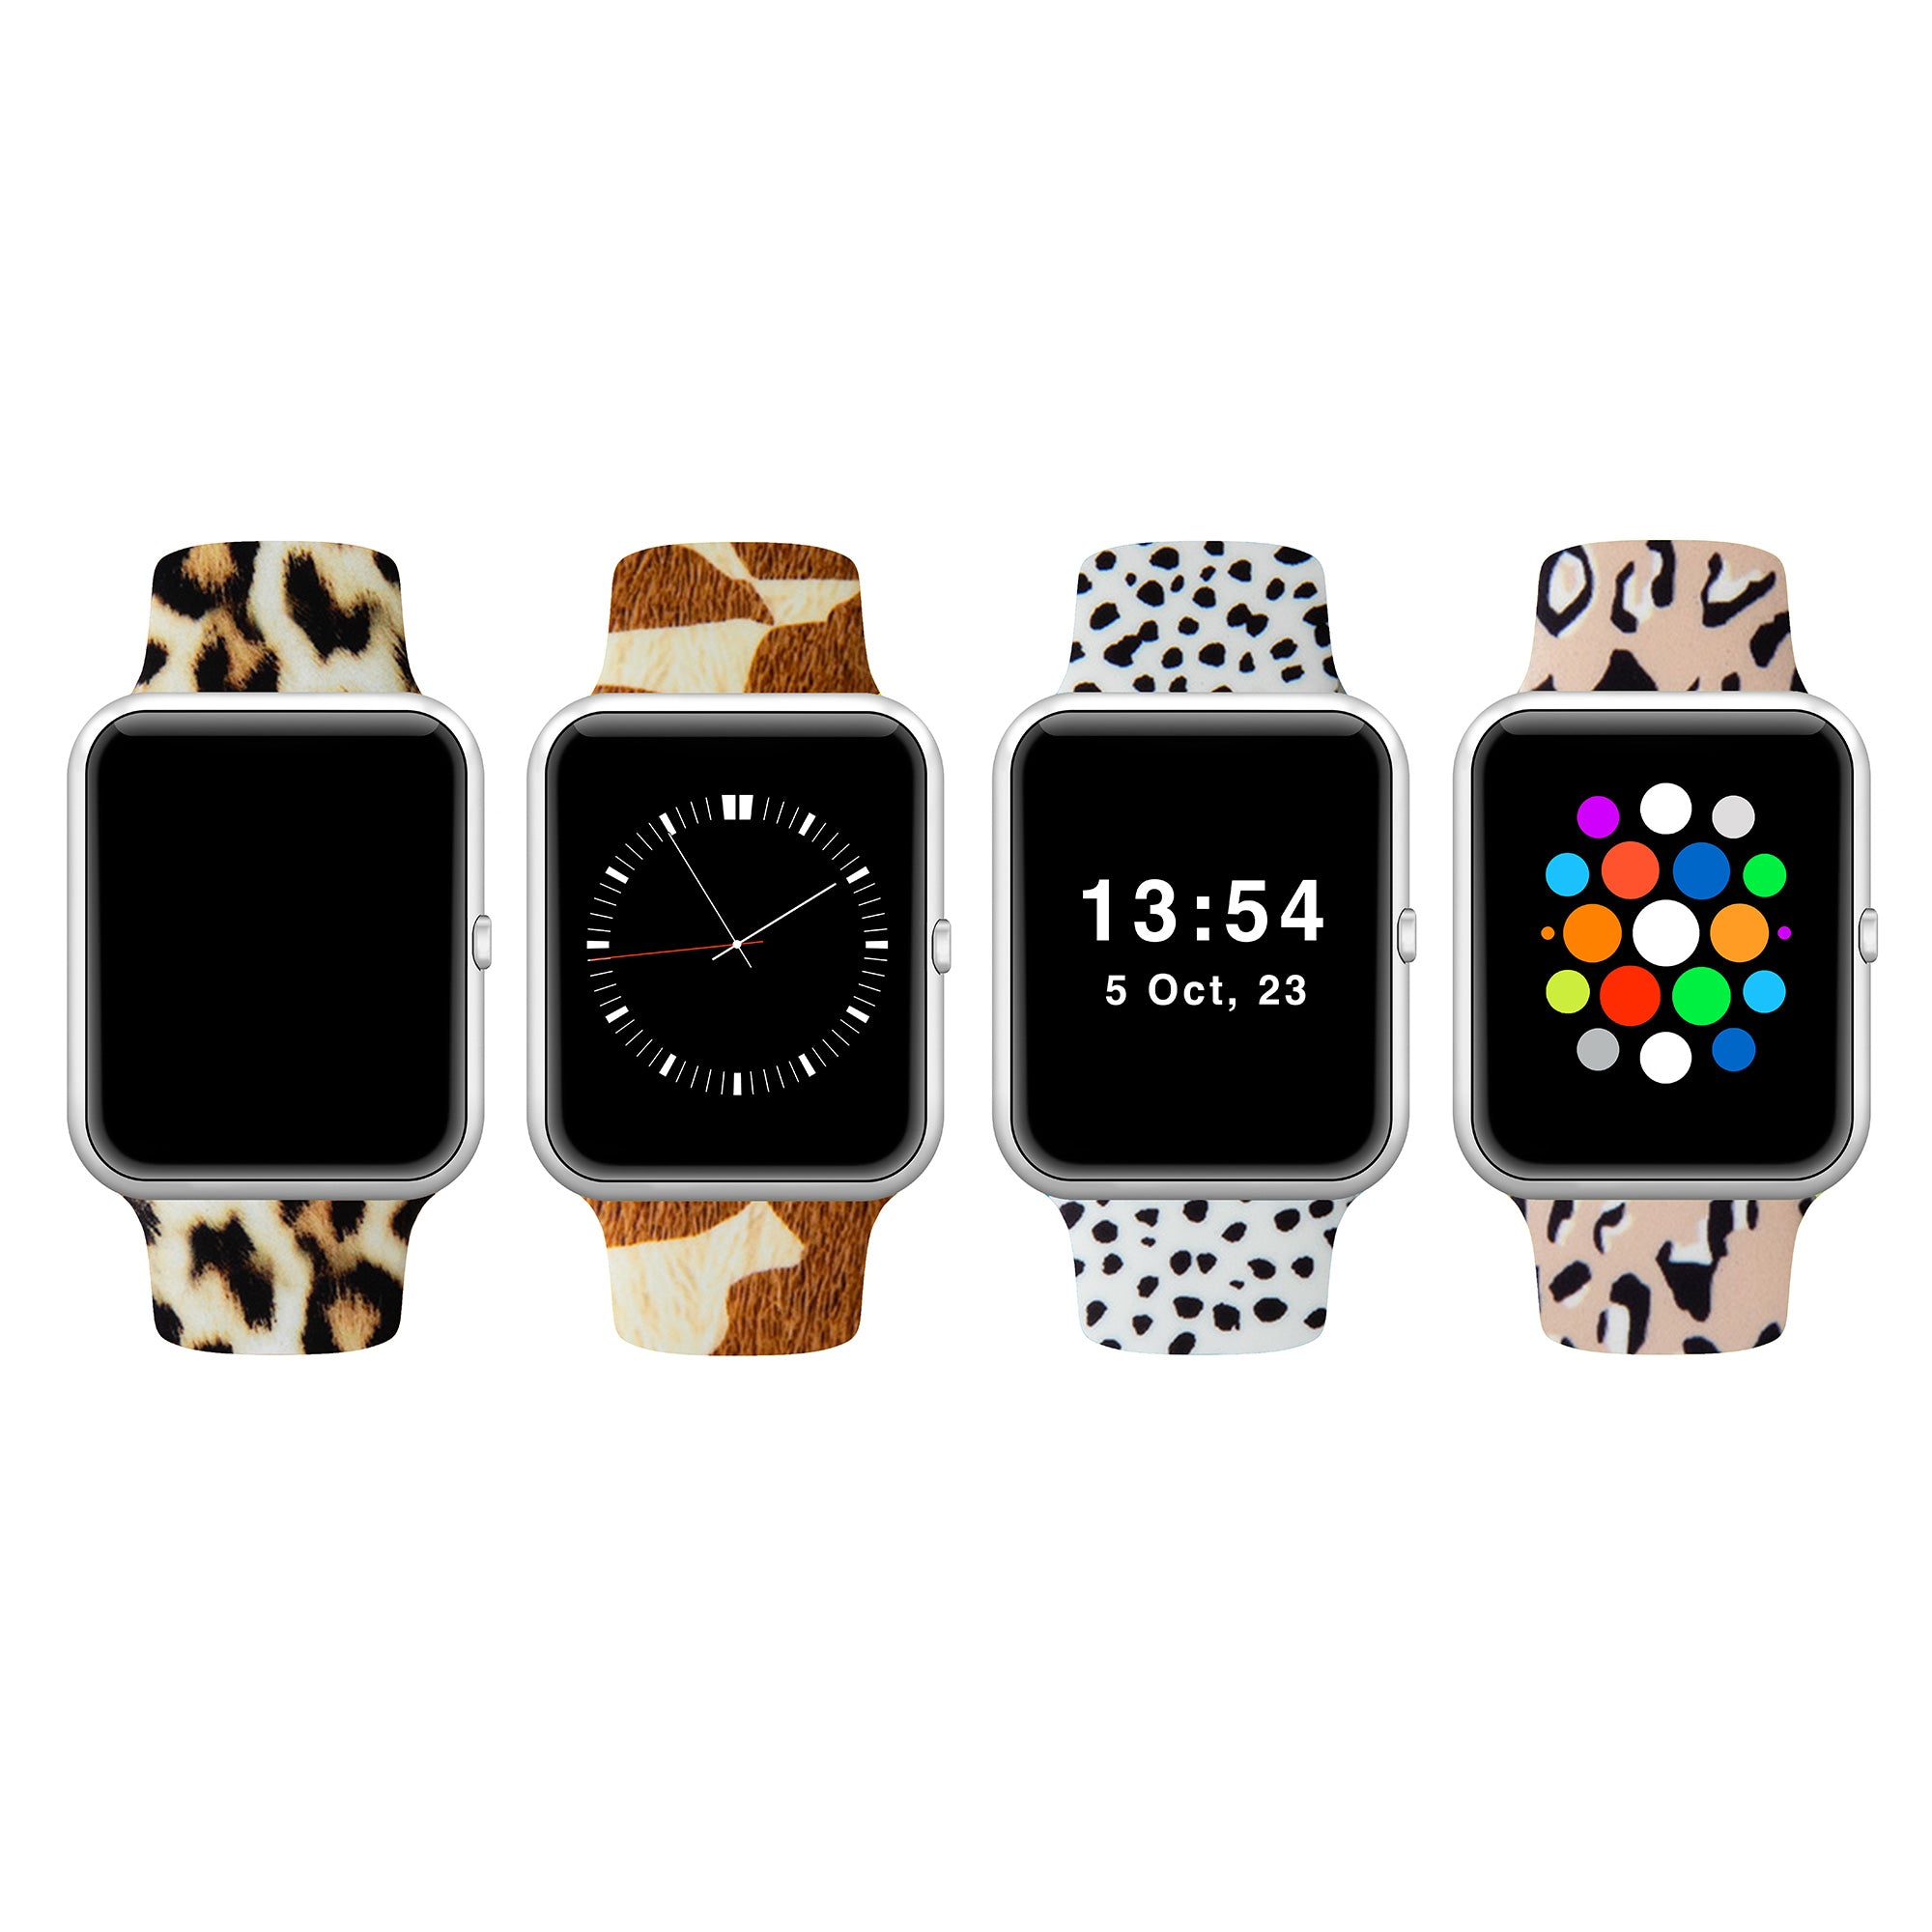 Patterned Silicone Apple Watch Band 38mm/40mm 42mm/44mm - Cut Out Paws - Black - 42mm/44mm